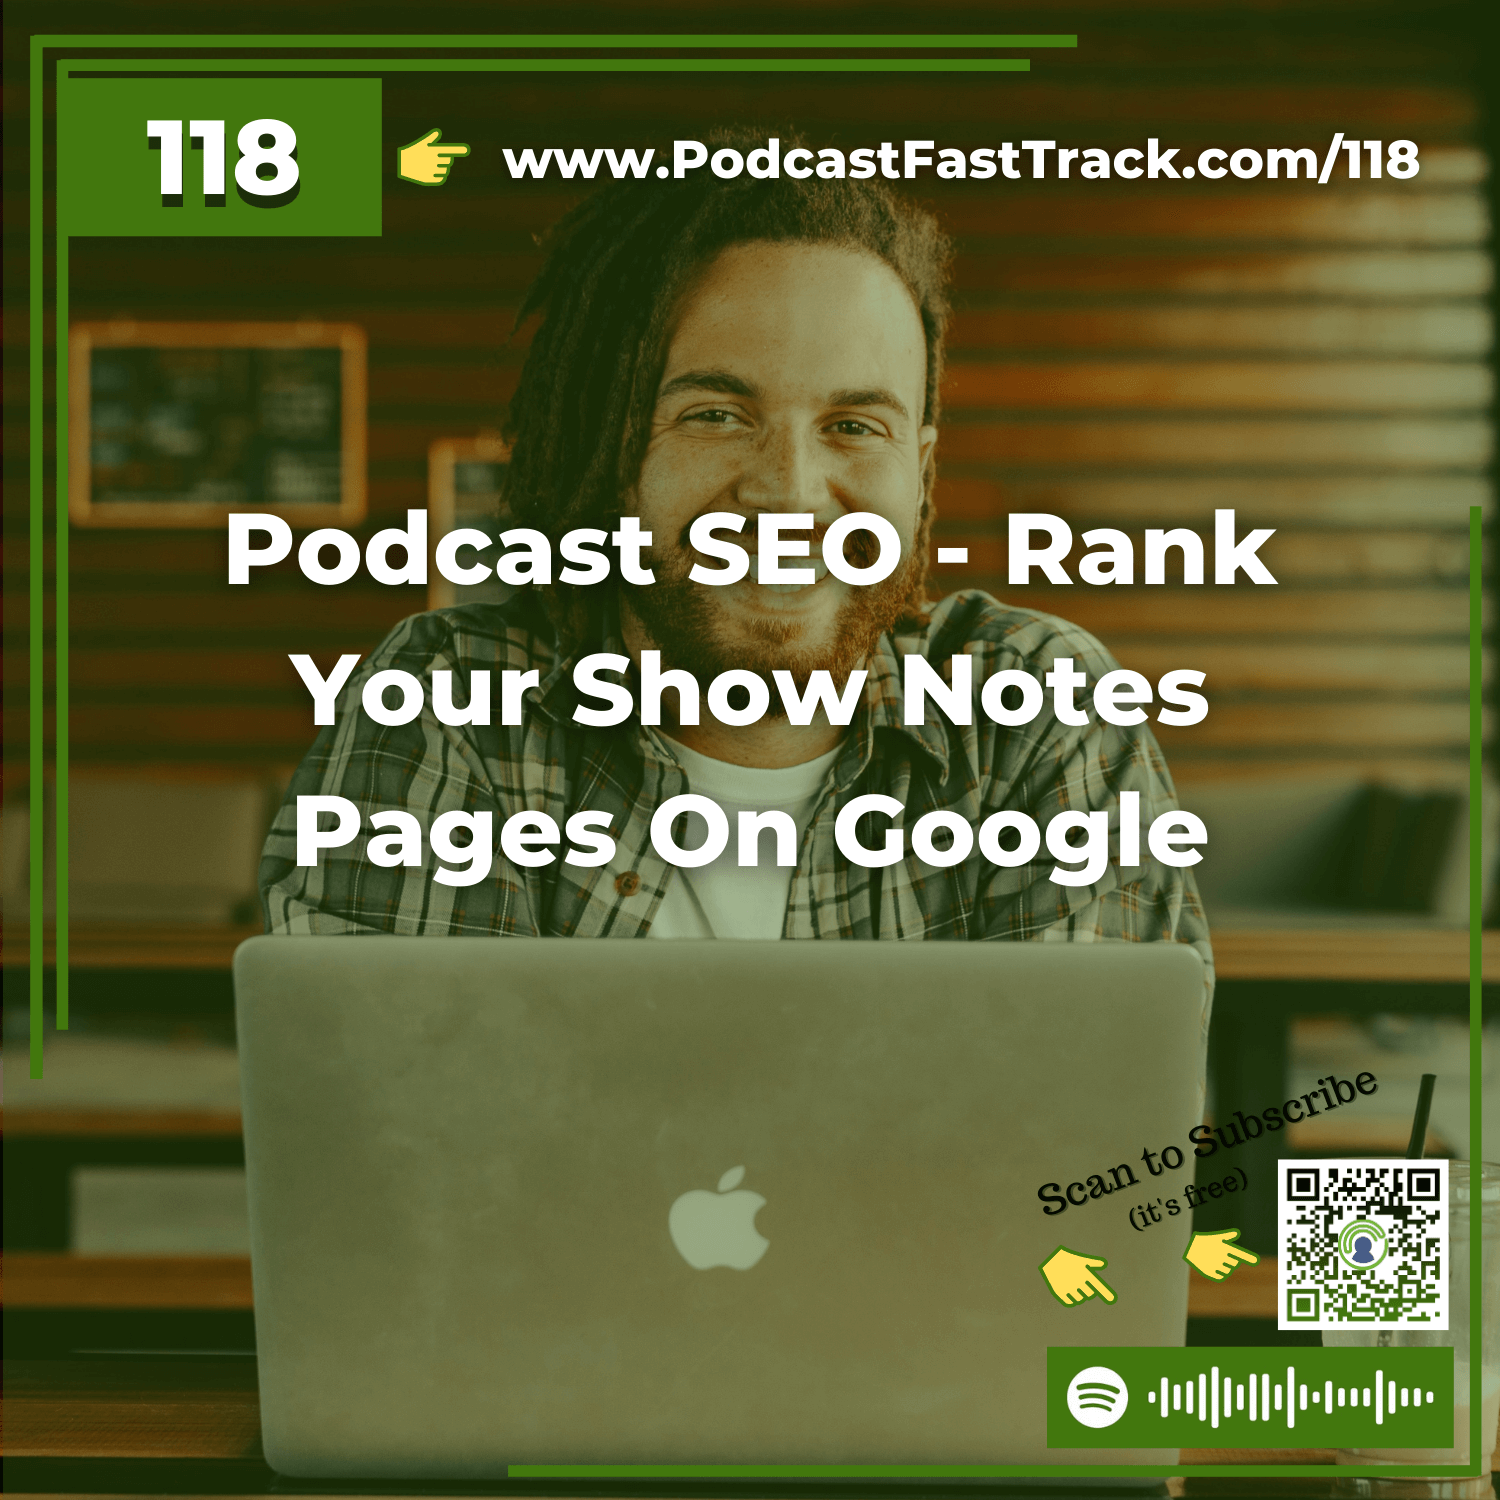 118 Podcast SEO - Rank Your Show Notes Pages On Google